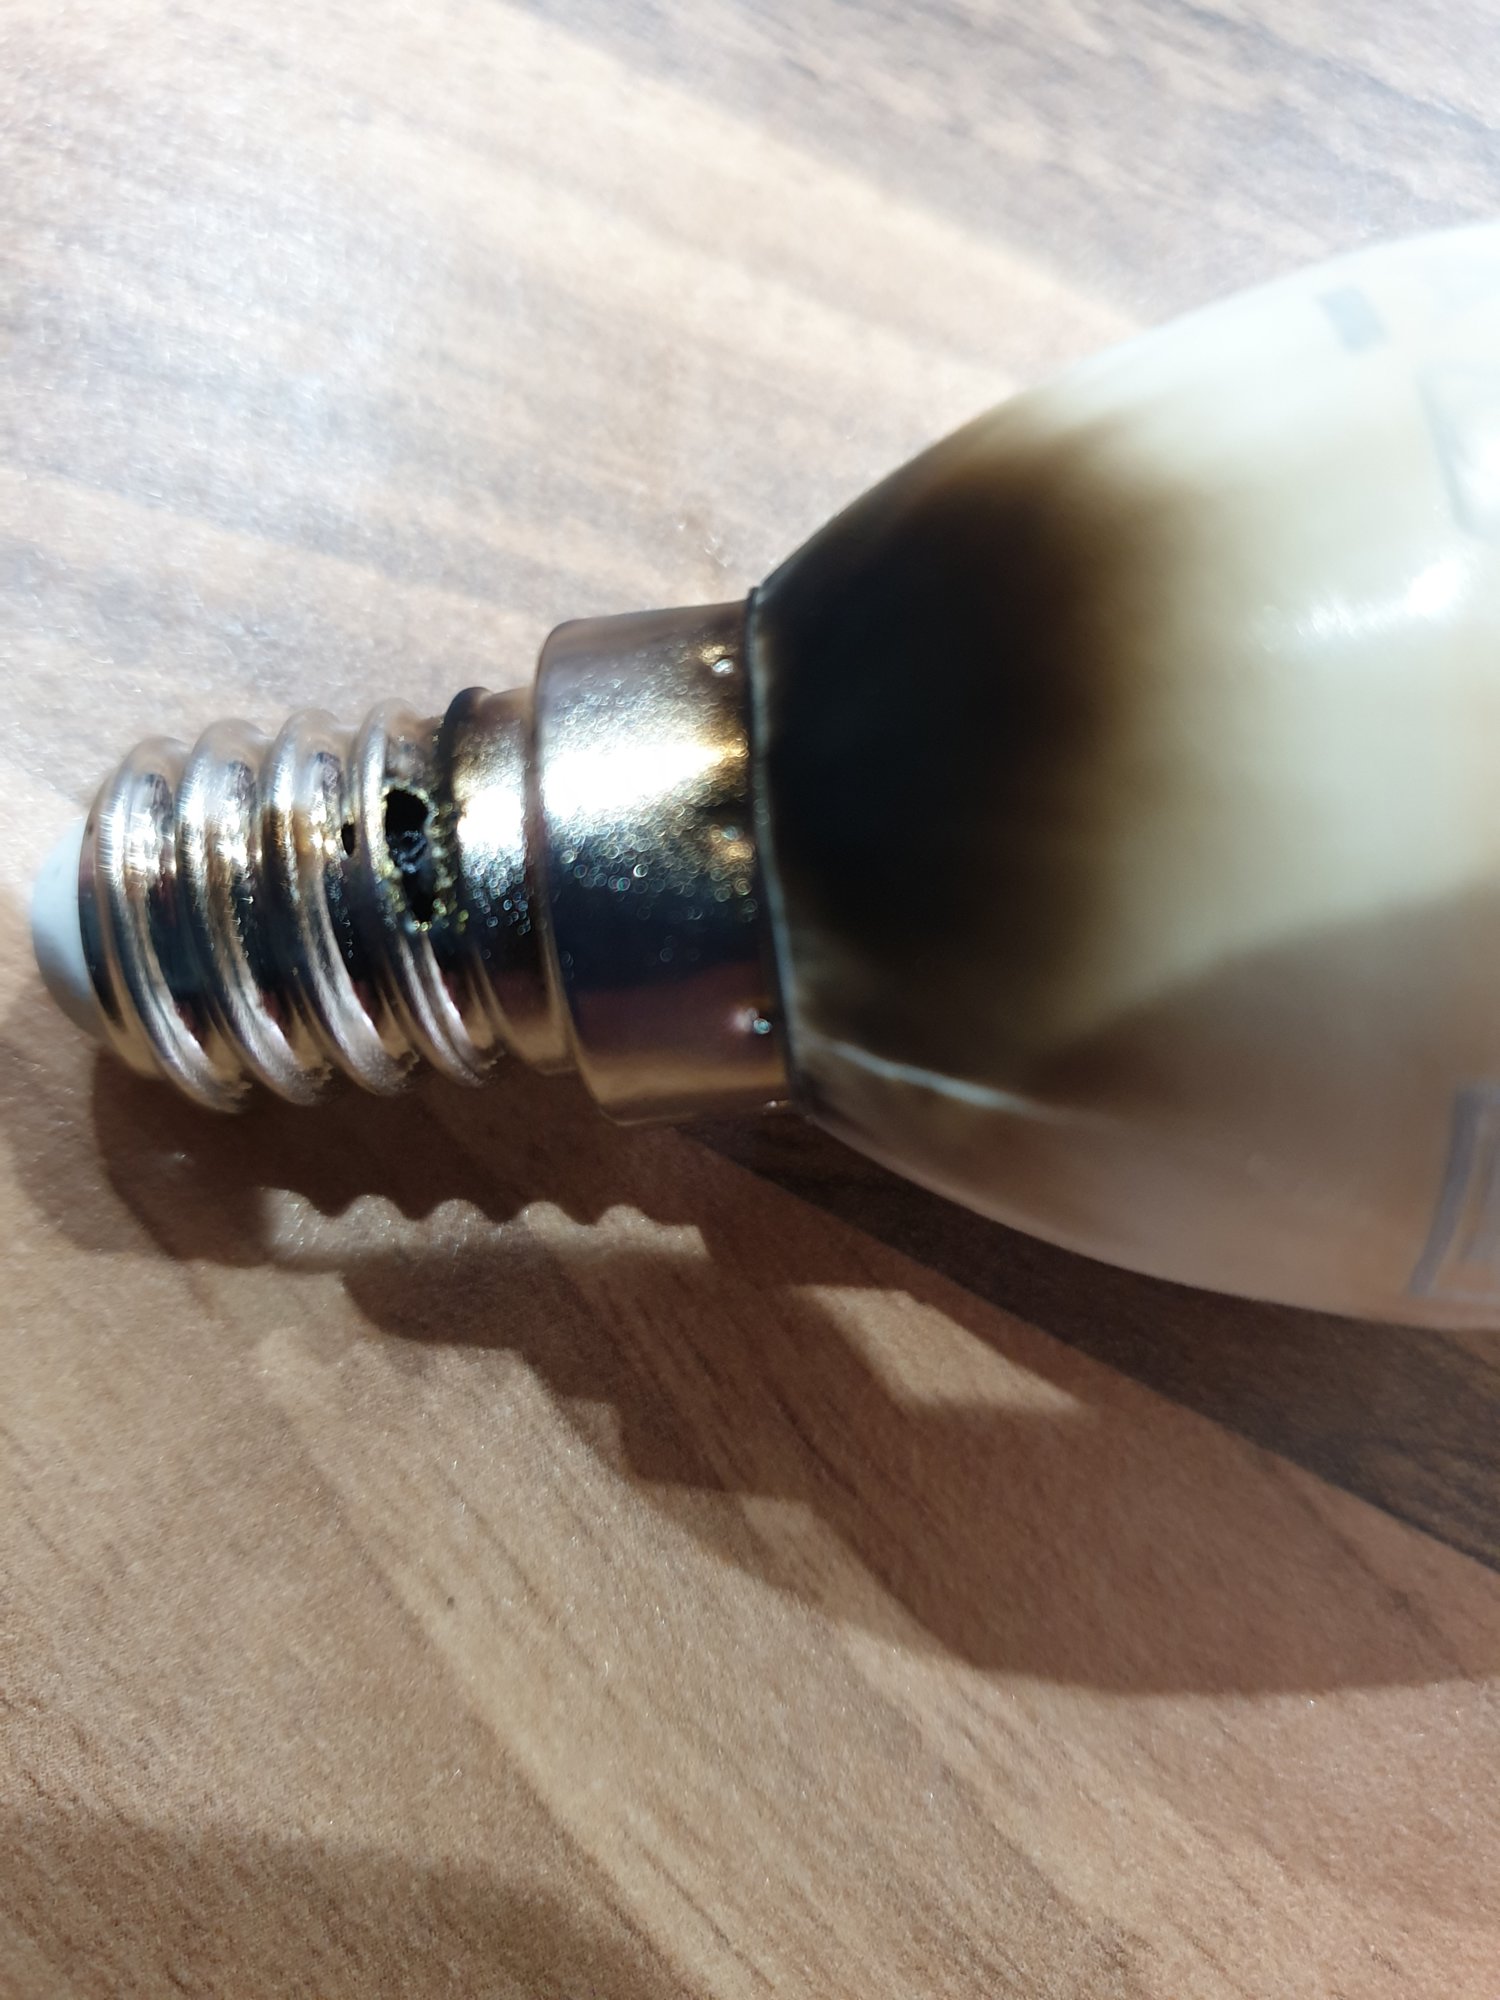 Worrying blown bulb | DIYnot Forums All Bulbs Blown At Same Time